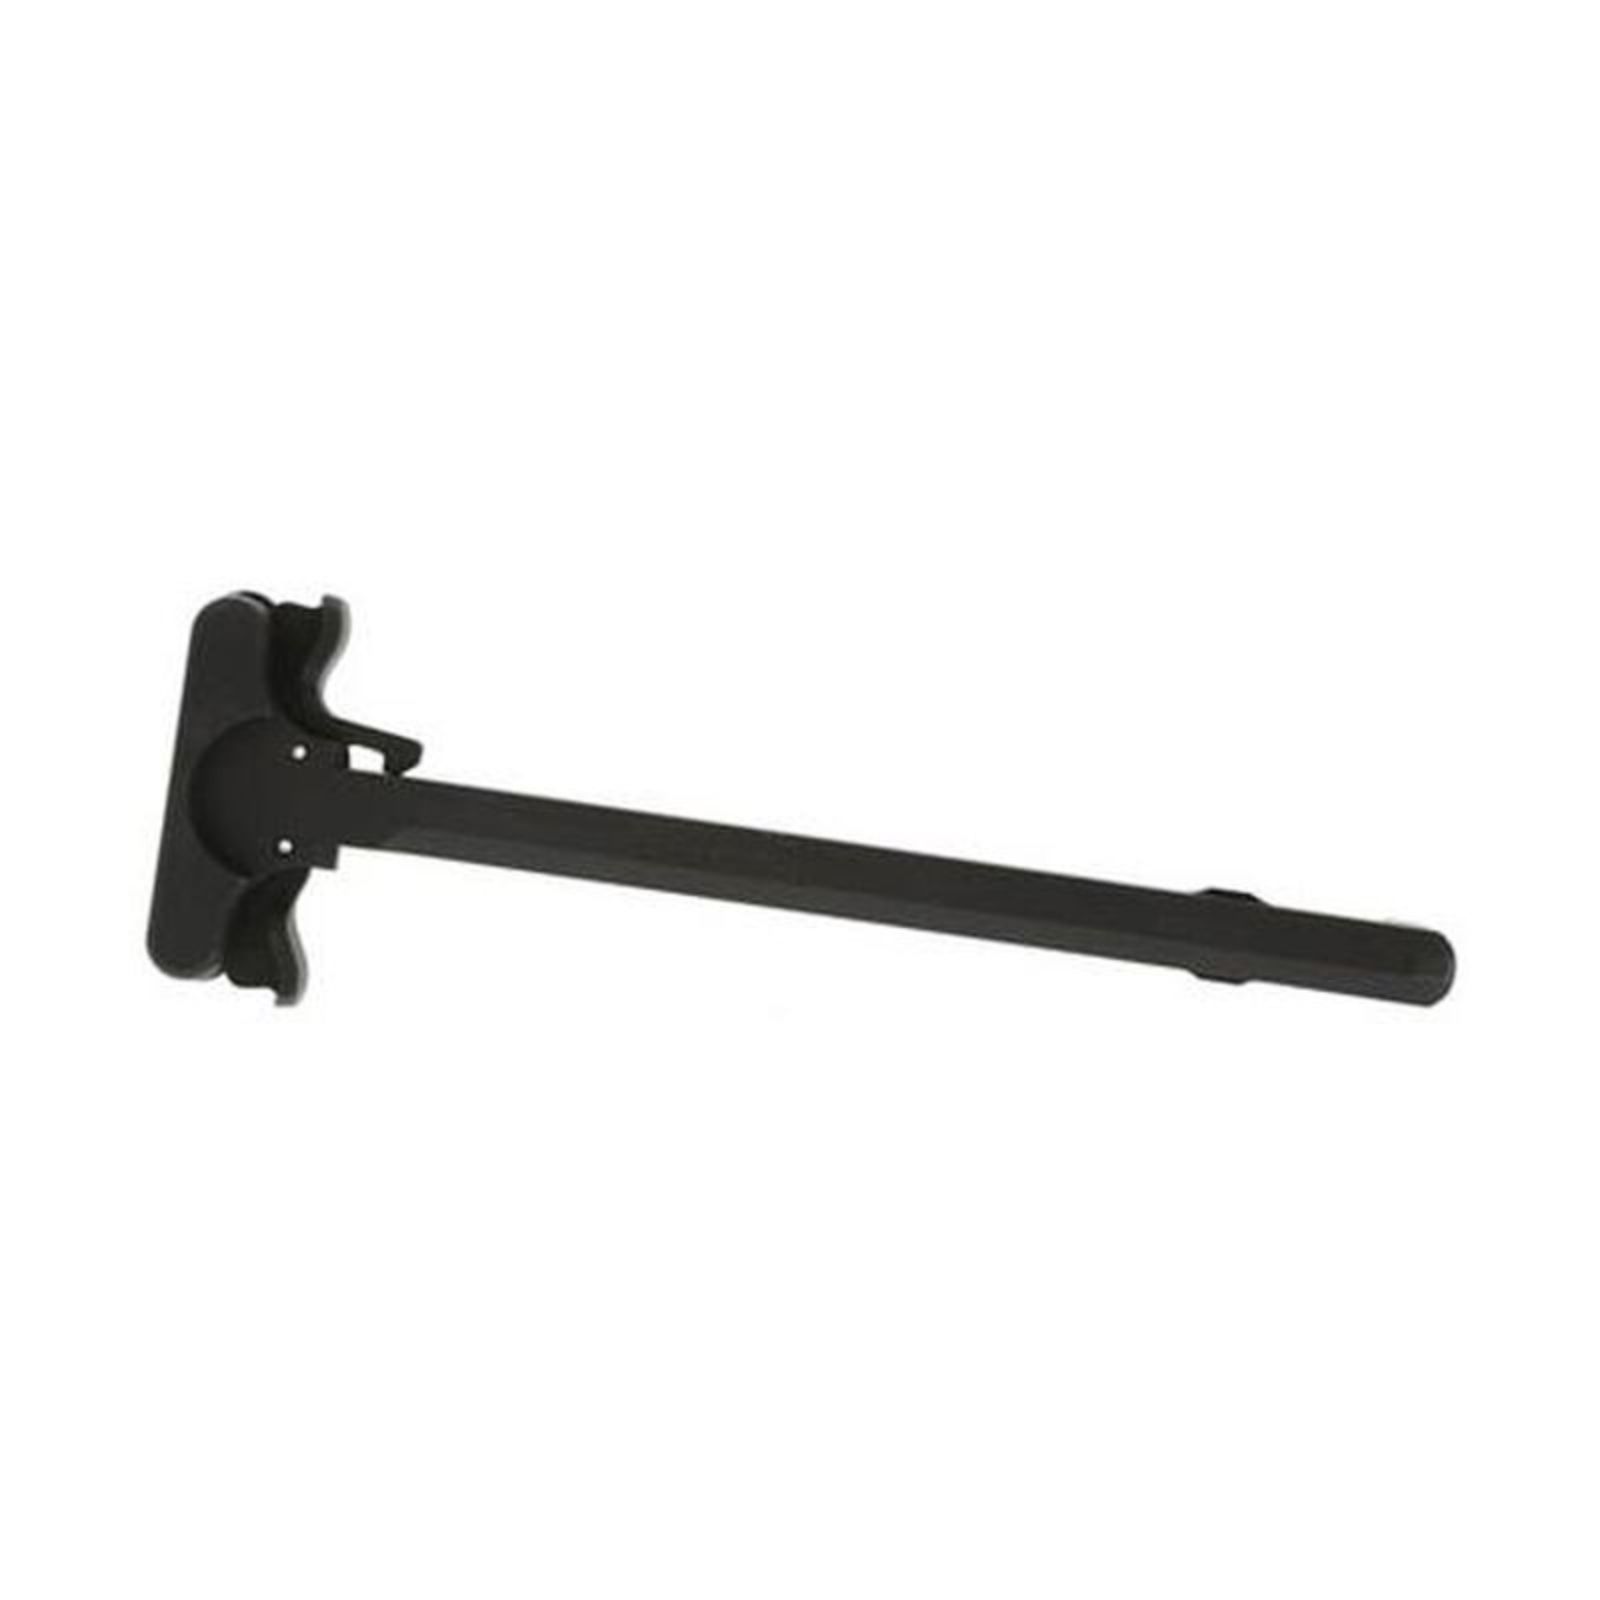 Troy Ambidextrous Extended Charging Handle 5.56